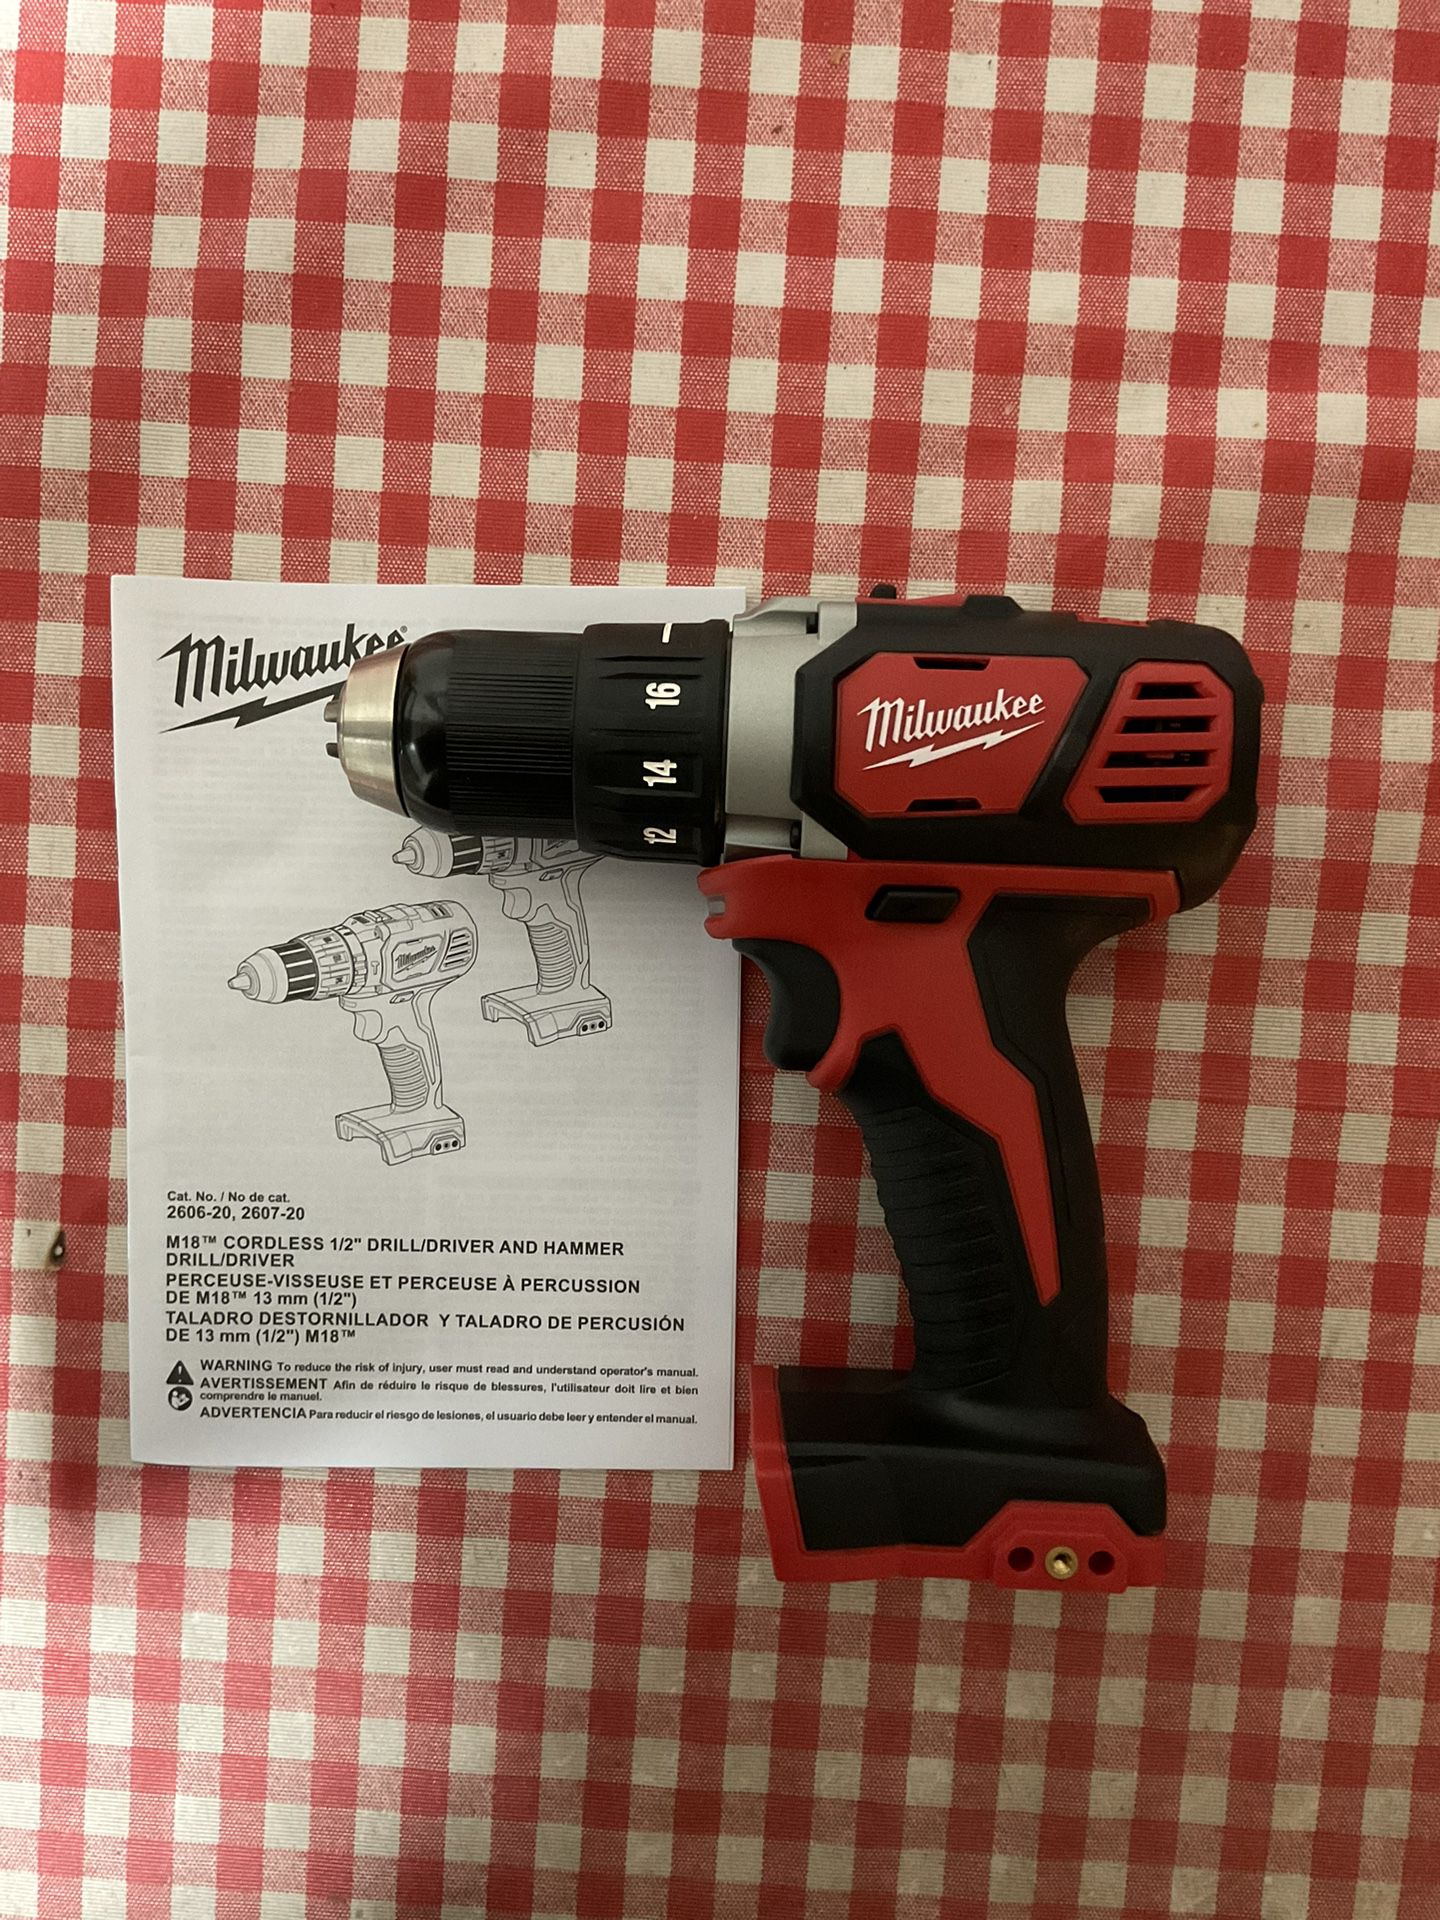 Milwaukee. M18 Lithium Ion Cordless 1/2” Drill Driver (Tool Only). 2606-20.